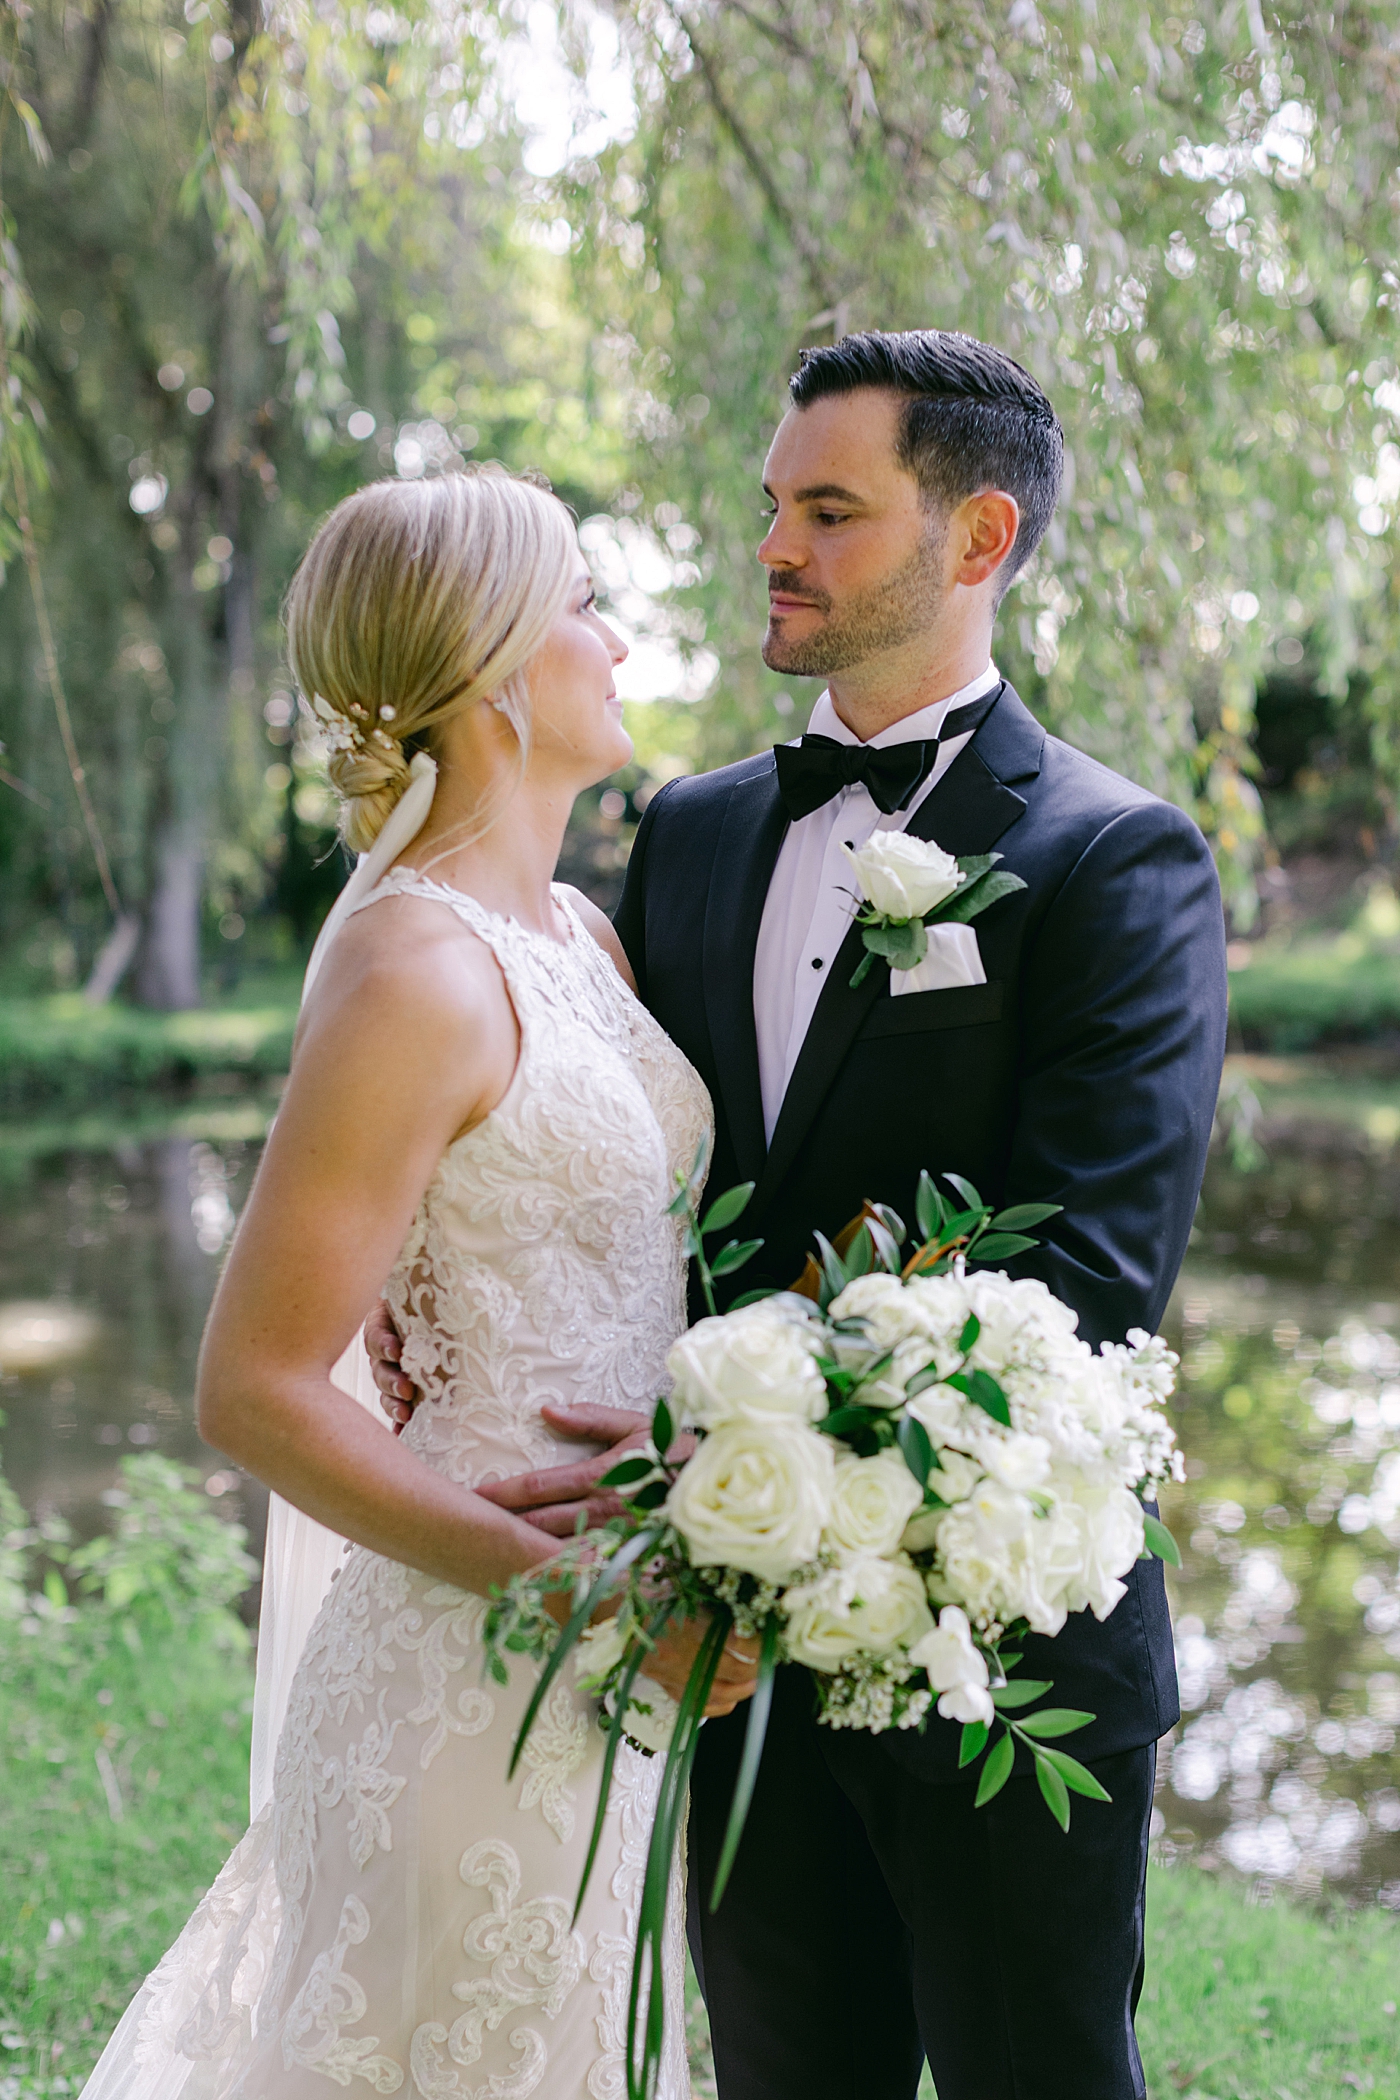 Bride and groom near a pond | Image by Hope Helmuth Photography